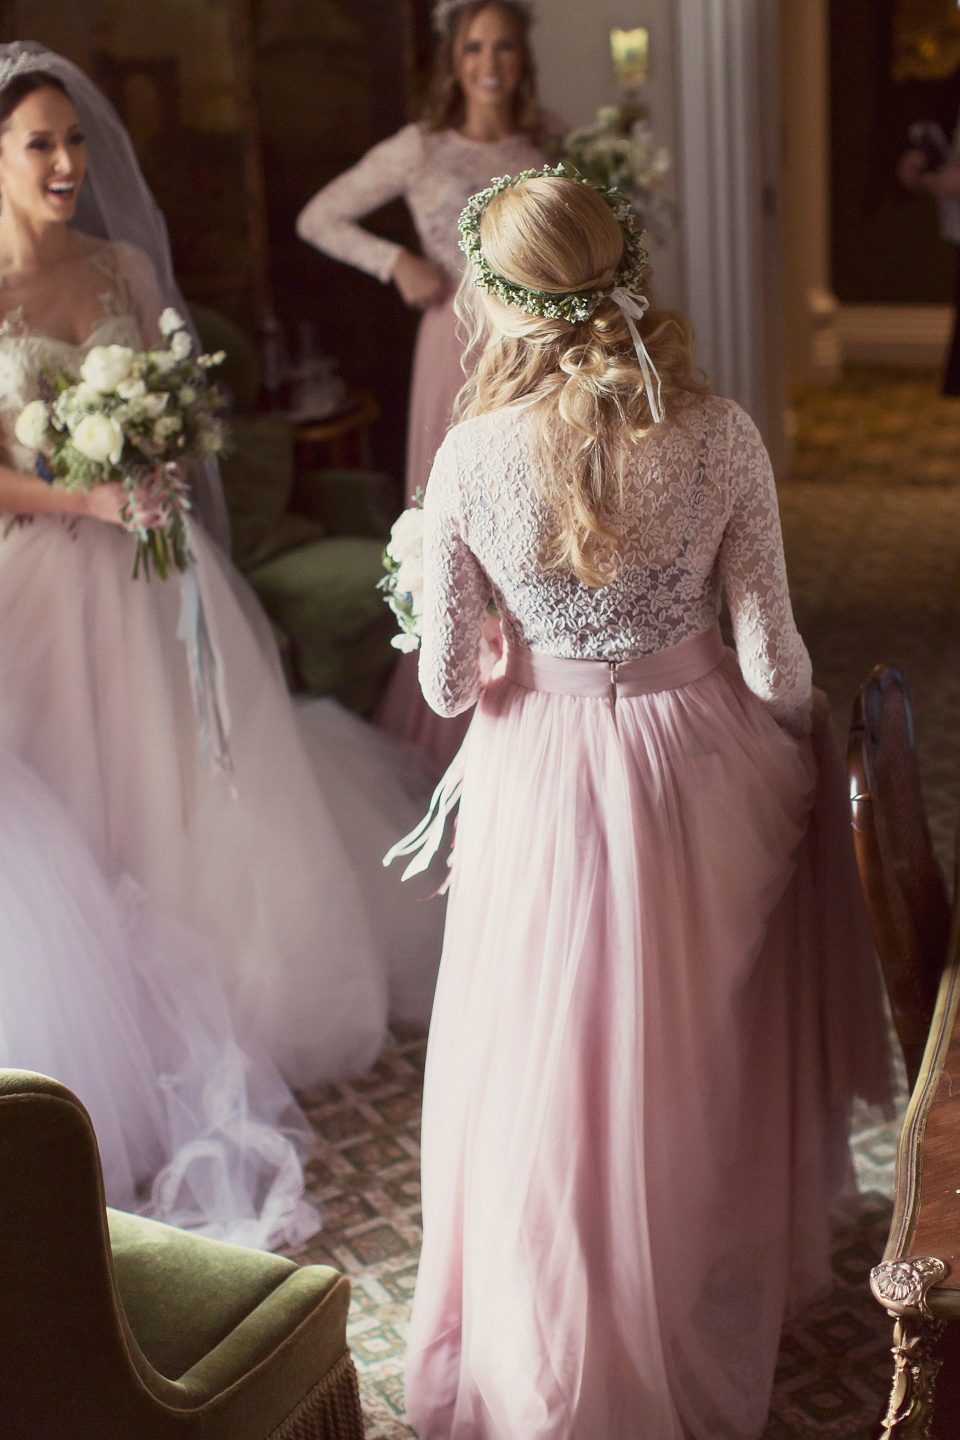 Juliana of Good Juju Ink wears a Marchesa gown for her super tasteful and elegant fairy tale Celtic and Jewish fusion wedding at Ashford Castle. Photography by Craig & Eva Sanders.